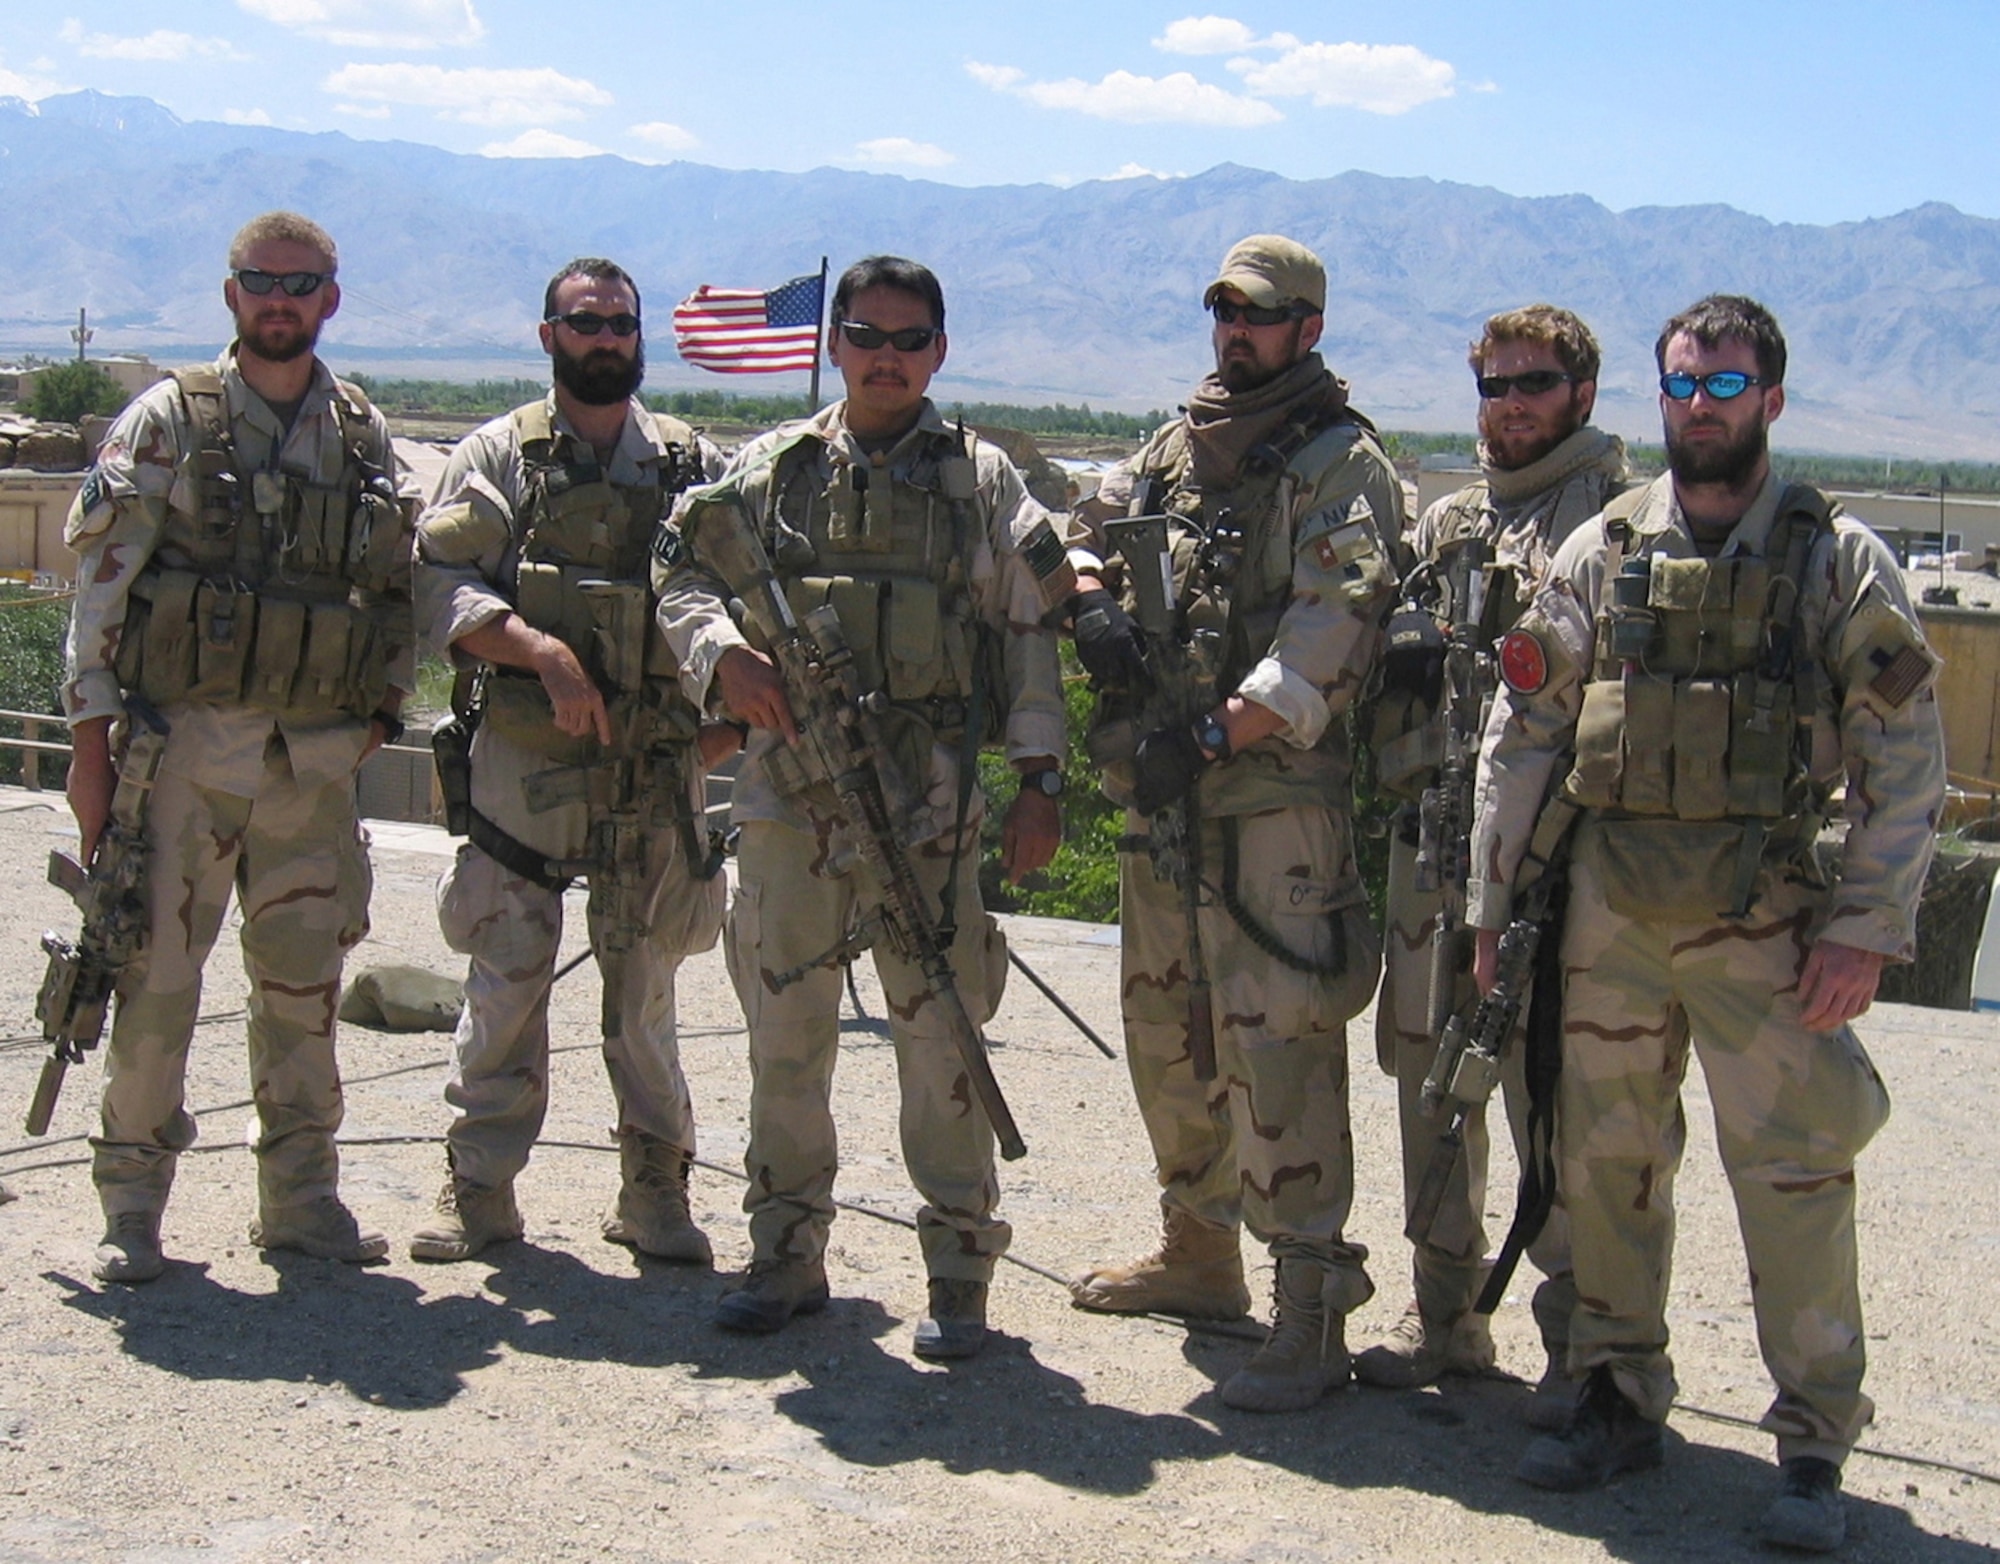 Navy SEALs operating in Afghanistan in support of Operation Enduring Freedom. From left to right, Sonar Technician (Surface) 2nd Class Matthew G. Axelson, of Cupertino, Calif; Senior Chief Information Systems Technician Daniel R. Healy, of Exeter, N.H.; Quartermaster 2nd Class James Suh, of Deerfield Beach, Fla.; Hospital Corpsman 2nd Class Marcus Luttrell, of Texas; Machinist?s Mate 2nd Class Eric S. Patton, of Boulder City, Nev.; and Lt. Michael P. Murphy, of Patchogue, N.Y. With the exception of Luttrell, all were killed June 28, 2005, by enemy forces while supporting Operation Red Wing. (U.S. Navy photo)
